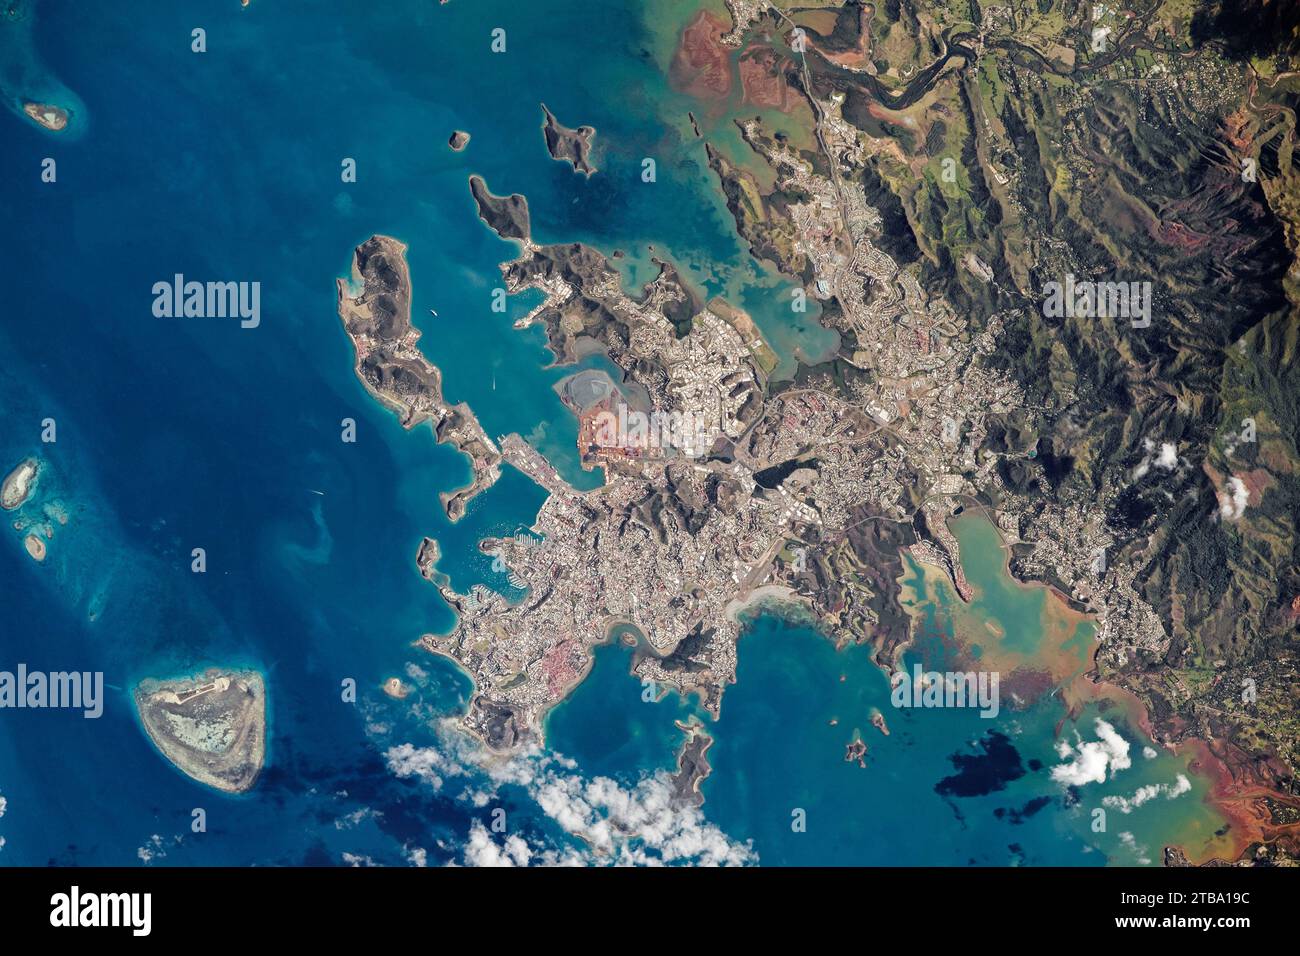 View from space of Noumea, the capital city of New Caledonia. Stock Photo